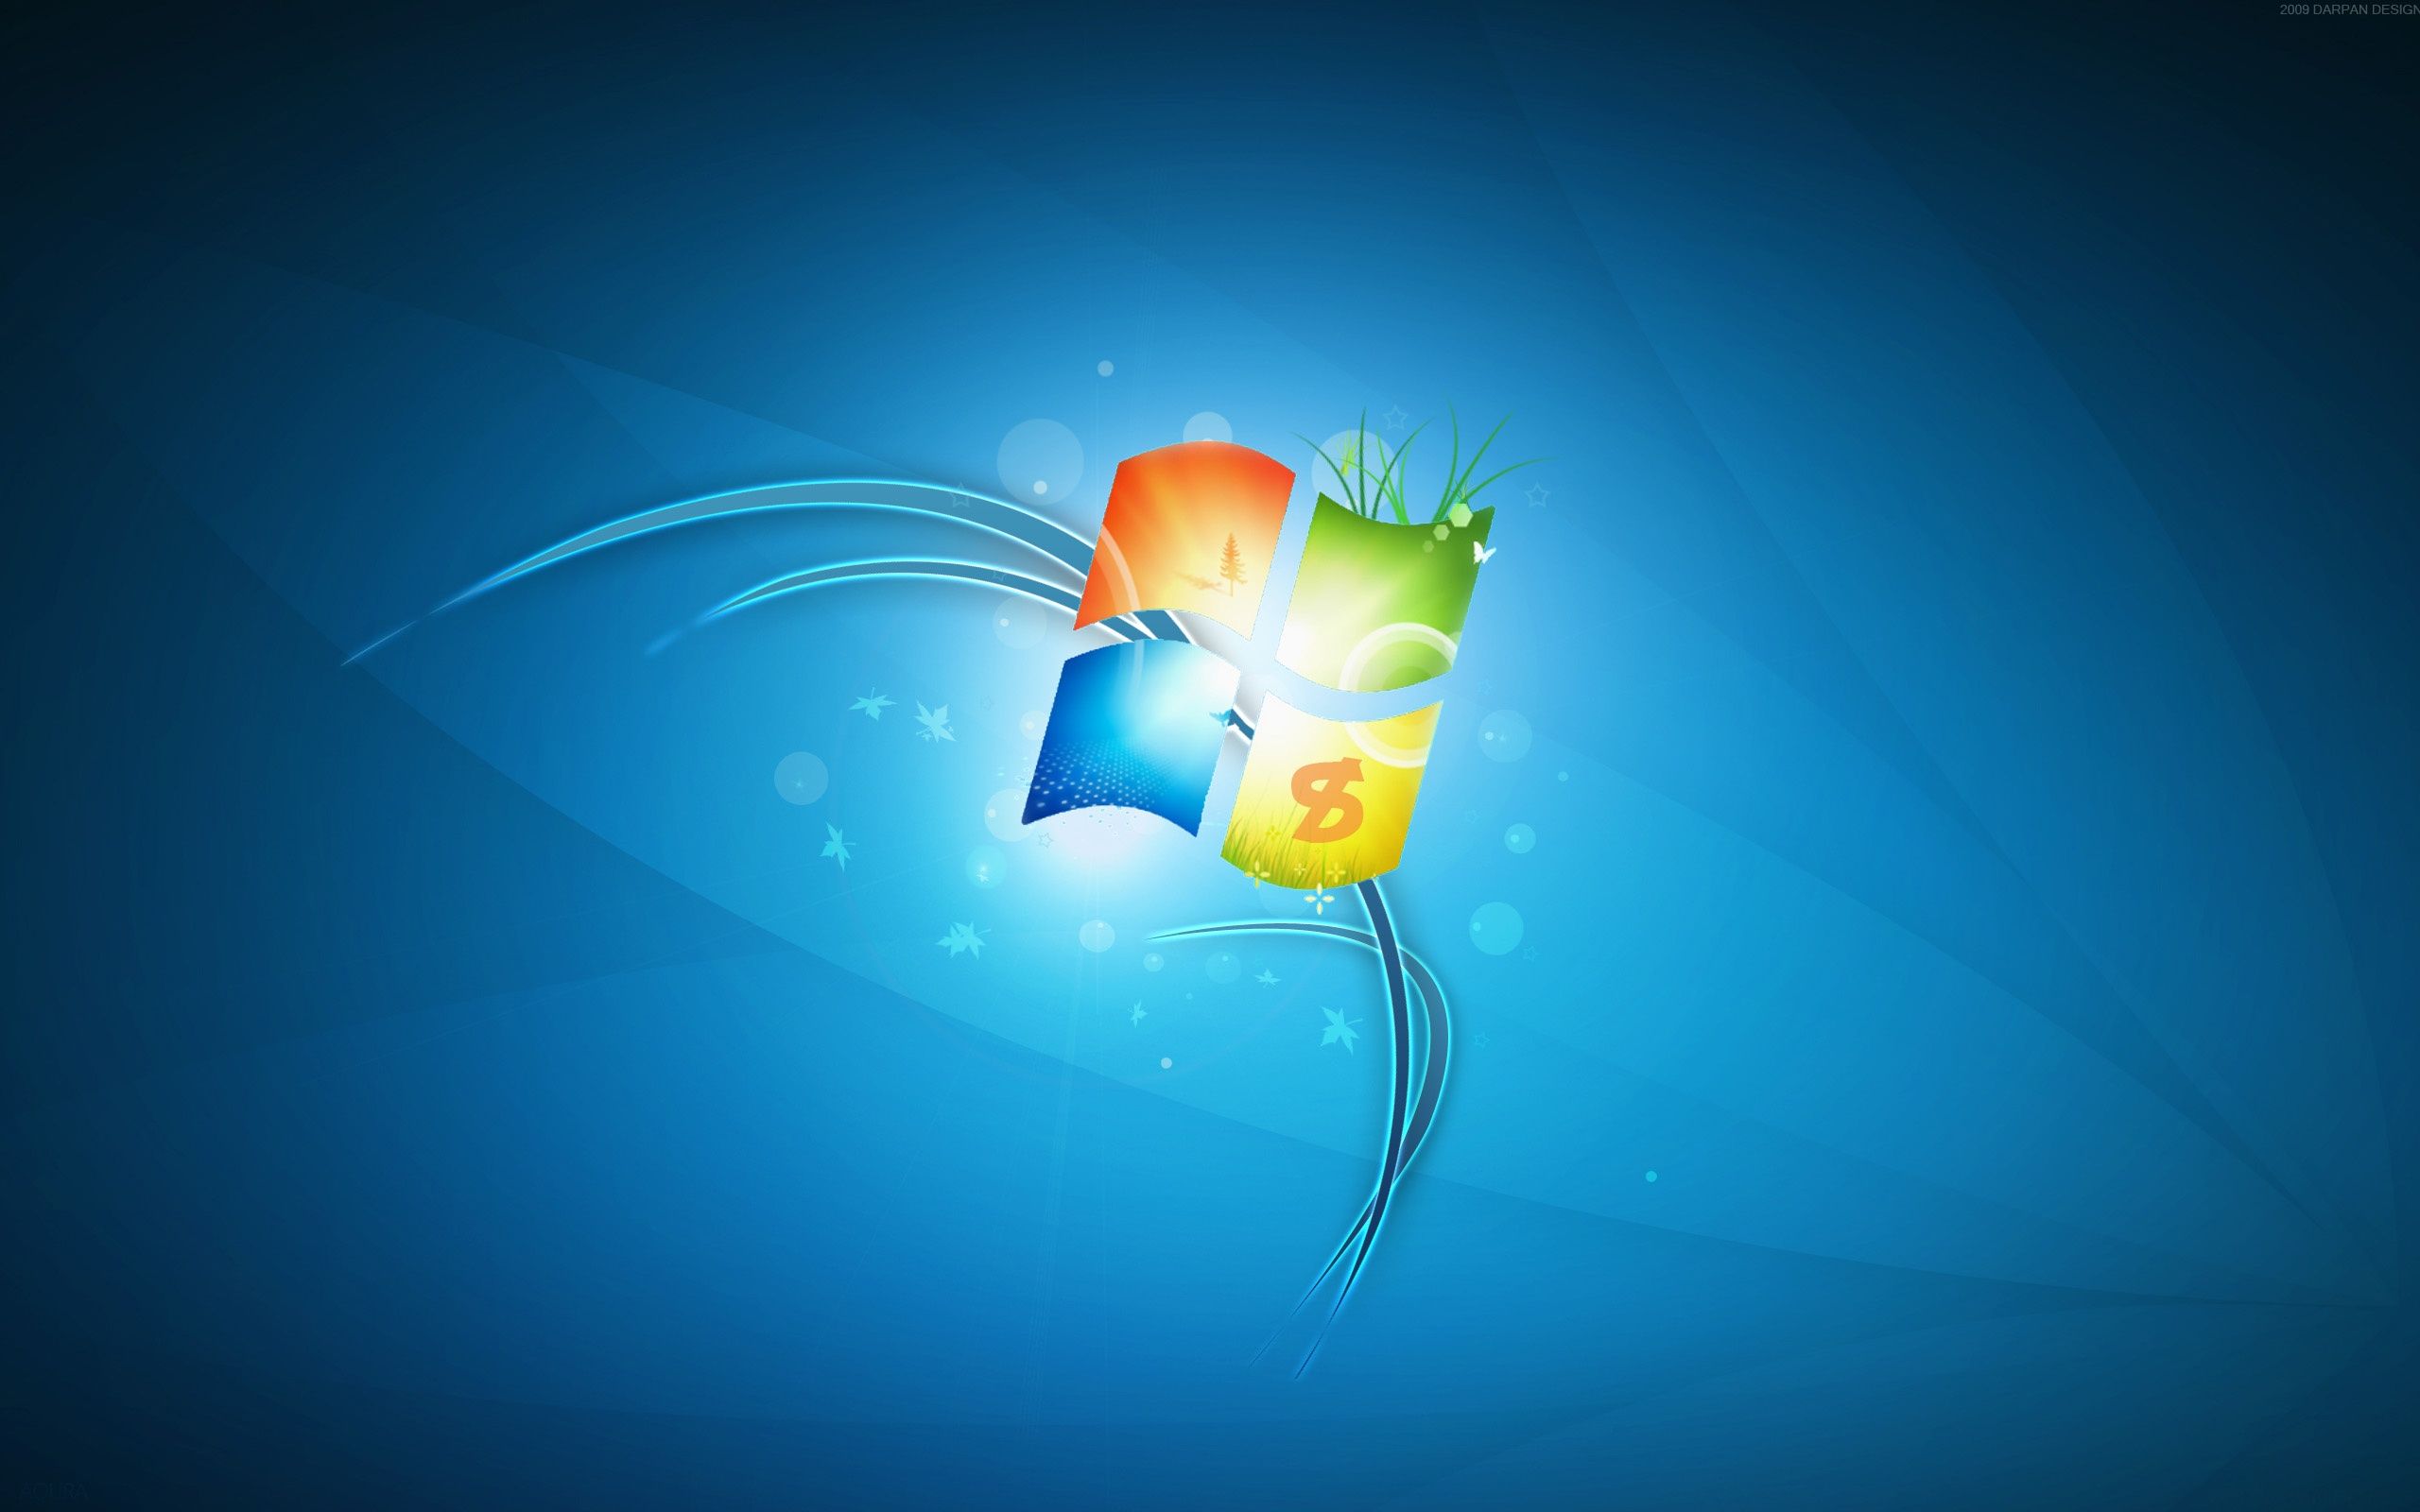 Windows 8 official wallpaper wallpapers and images - wallpapers